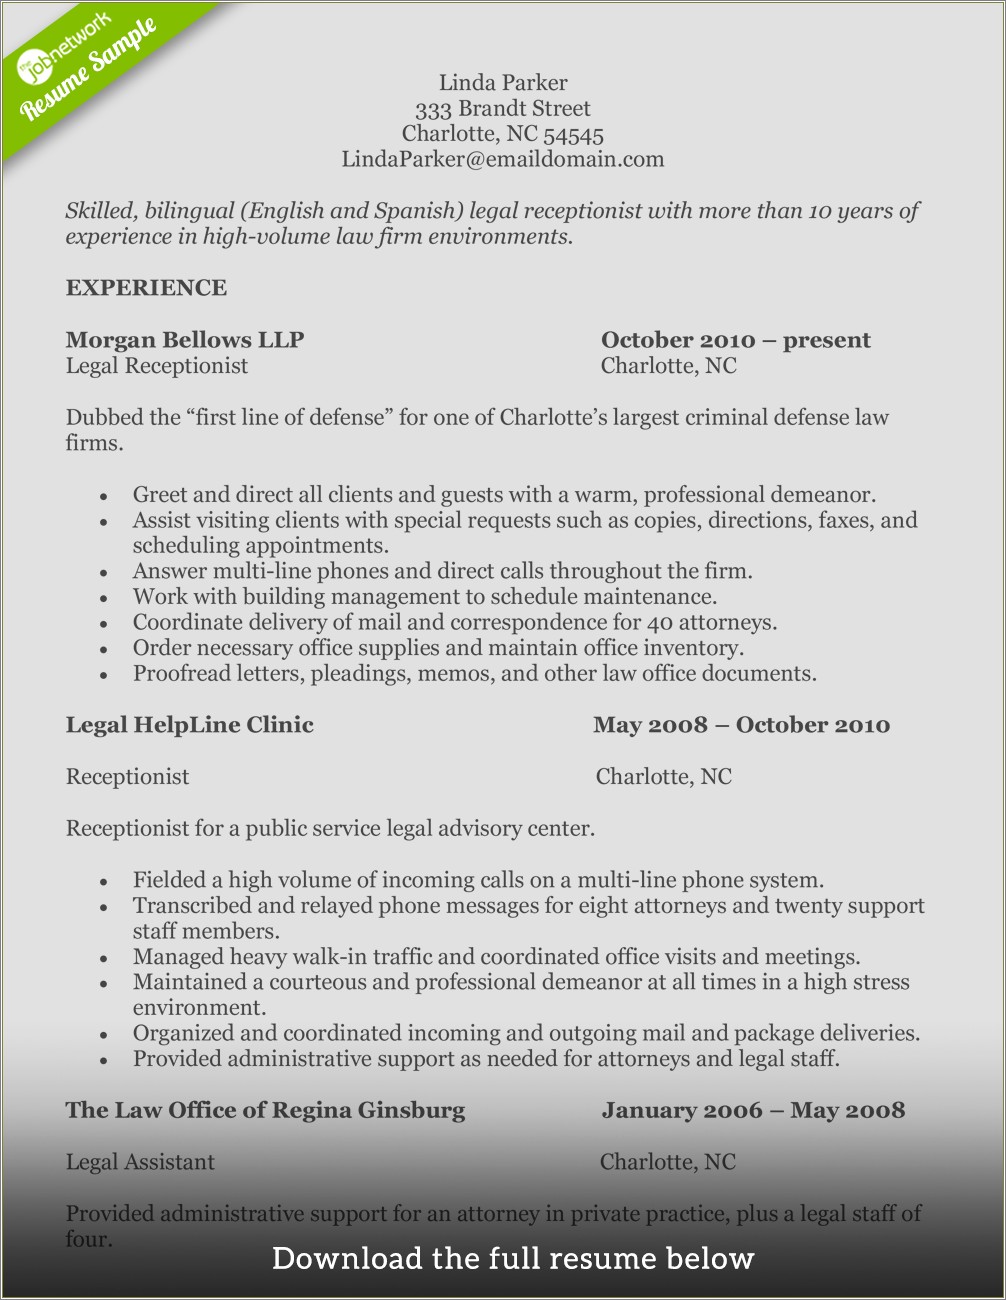 Administrative Assistant Resume With Reception Experience